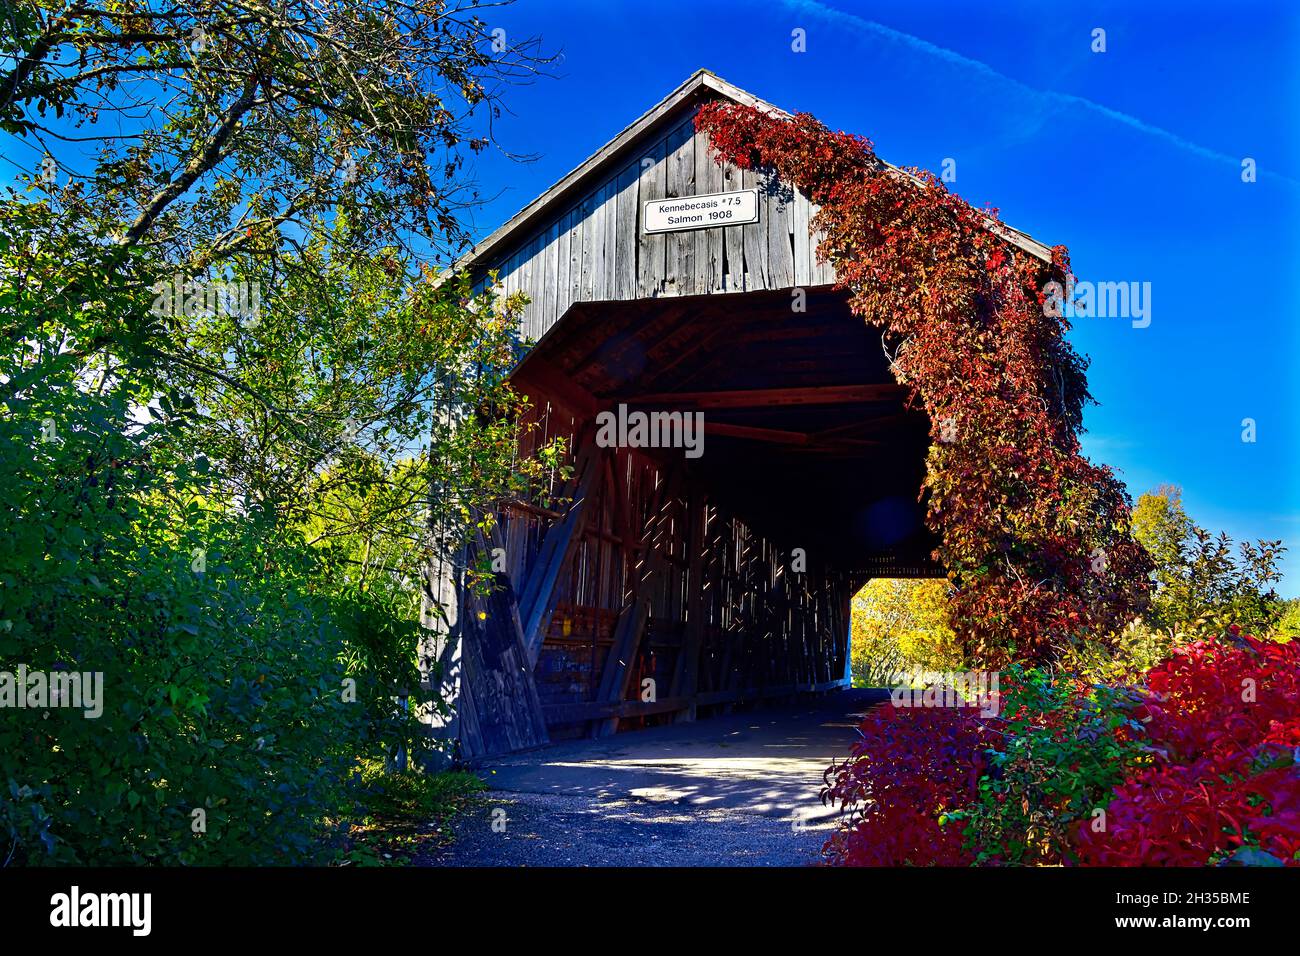 A one lane wooden covered bridge now retired and used as a park and tourist attraction near Smith Creek New Brunswick Canada. Stock Photo